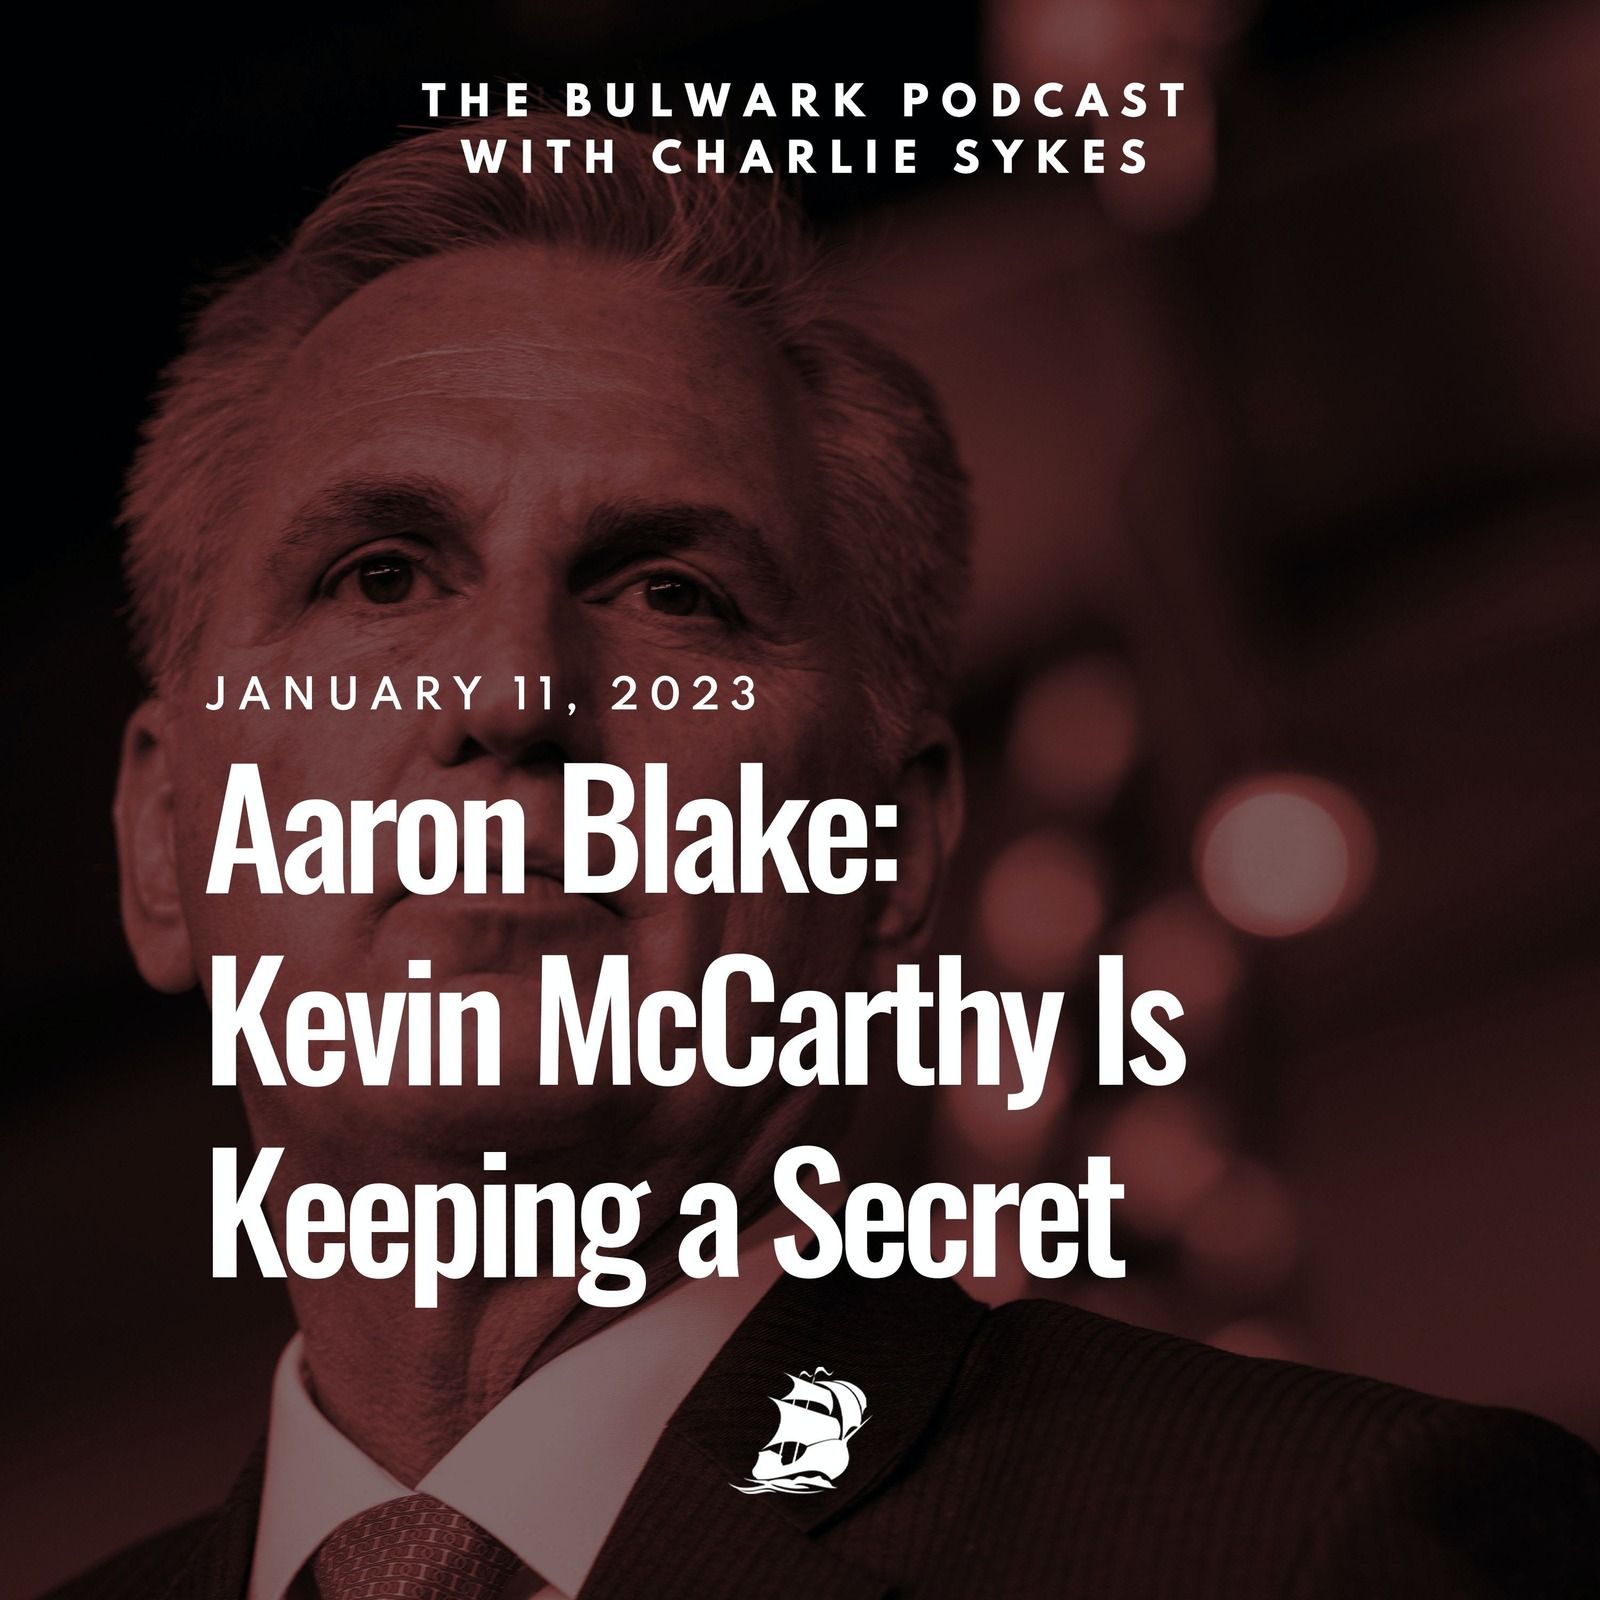 Aaron Blake: Kevin McCarthy Is Keeping a Secret by The Bulwark Podcast